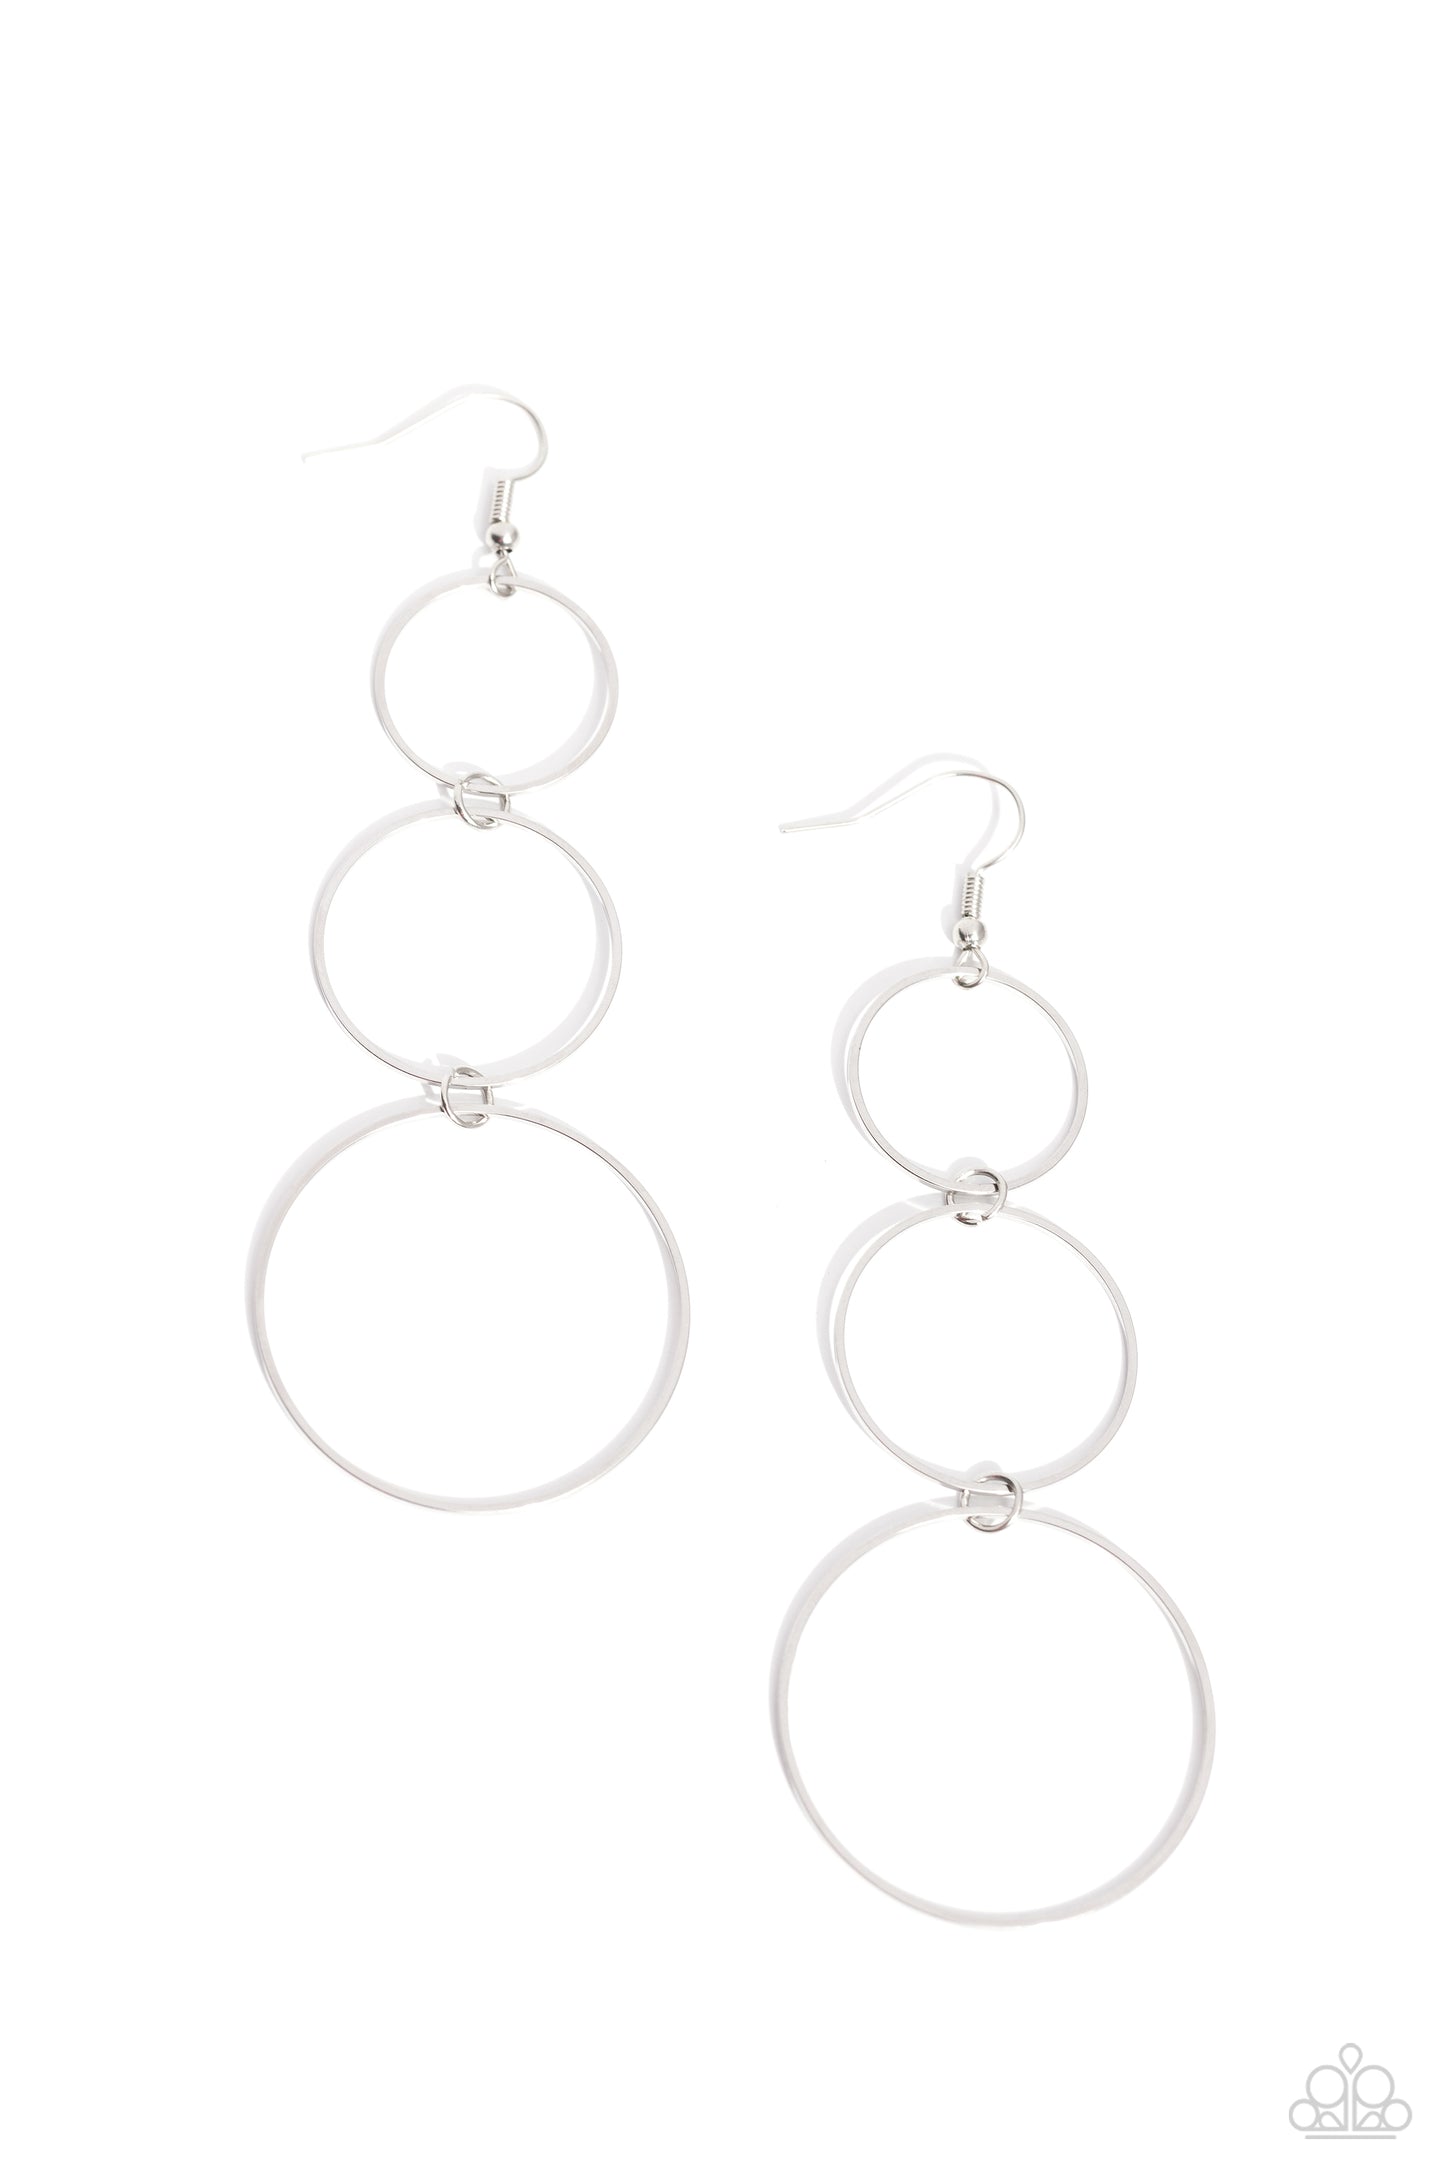 Urban Ozone Silver Earring - Paparazzi Accessories  Three flat silver hoops gradually increase in size as they link from the ear, creating a dizzyingly lure. Earring attaches to a standard fishhook fitting.  Sold as one pair of earrings.  Sku:  P5BA-SVXX-119XX